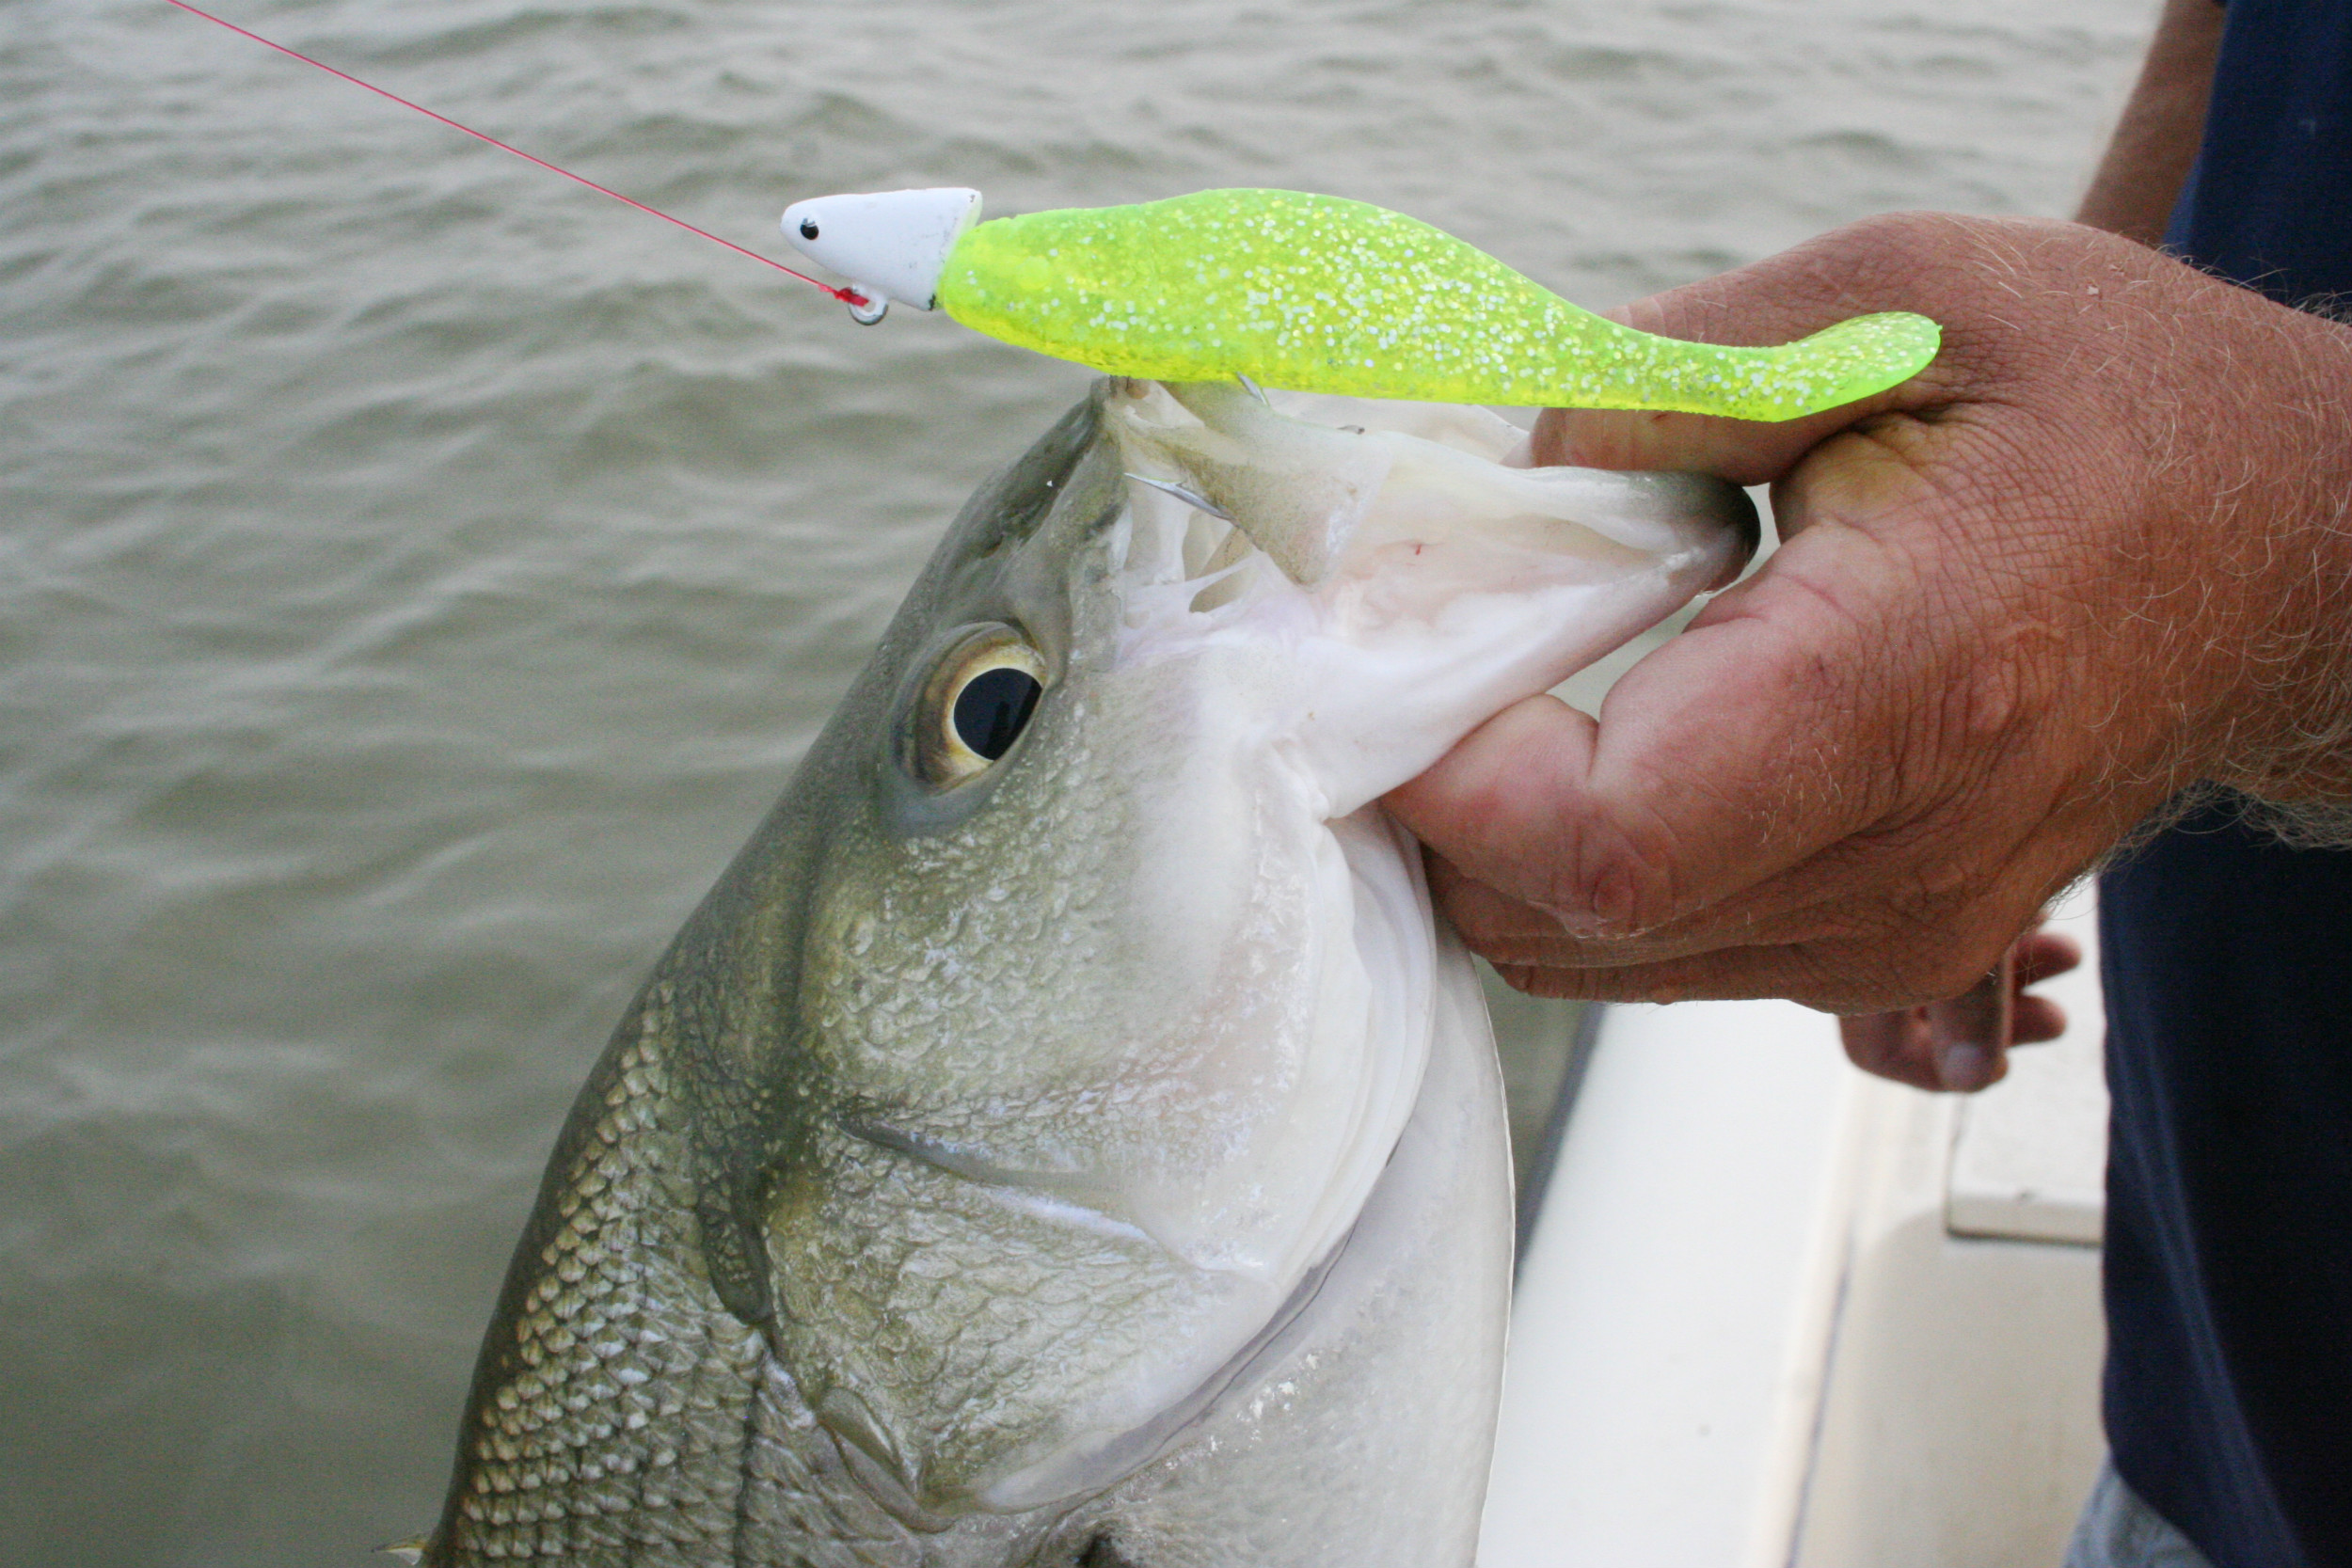 Texas fishing calendar: Your monthly best bets to hook up